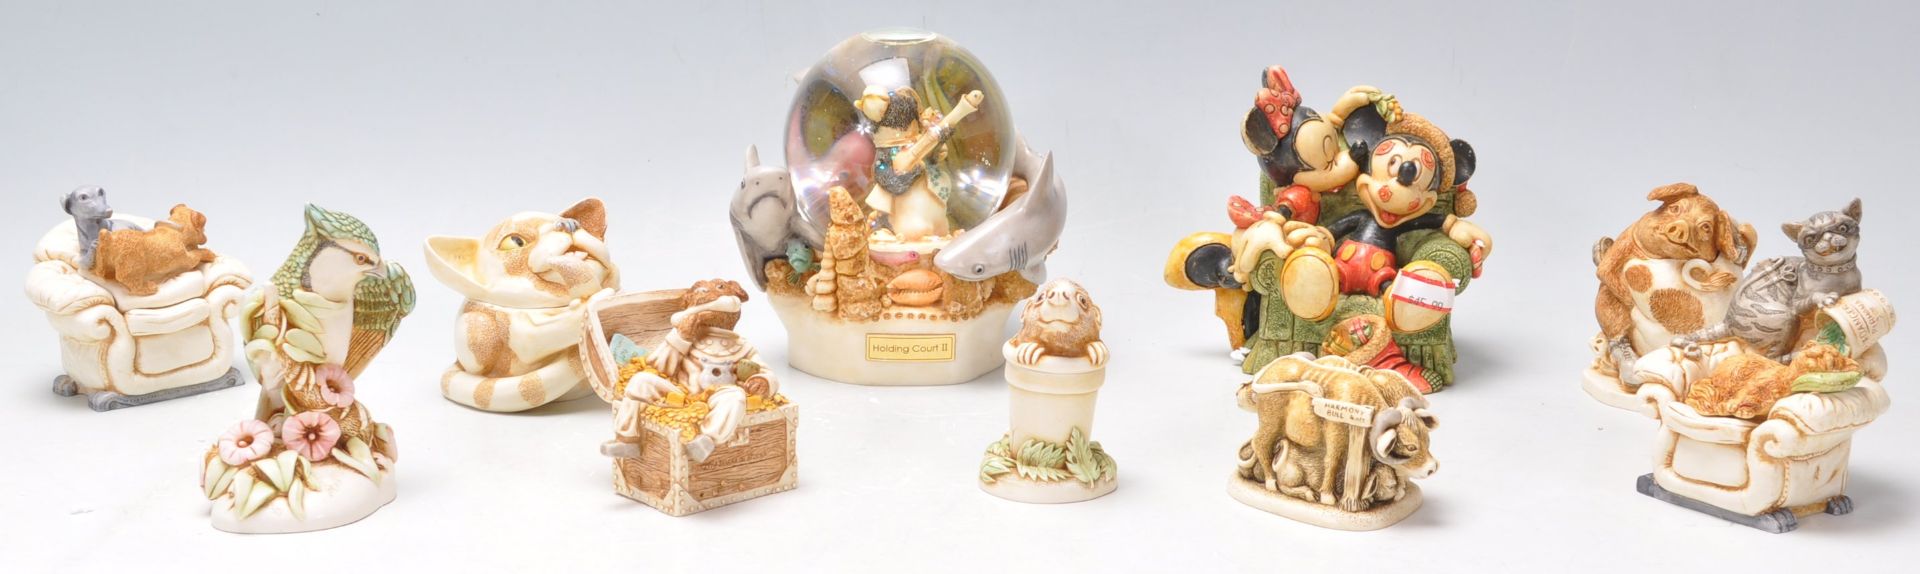 A group of ten Harmony Kingdom resin novelty figurines / boxes to include 'Holding Court II' snow